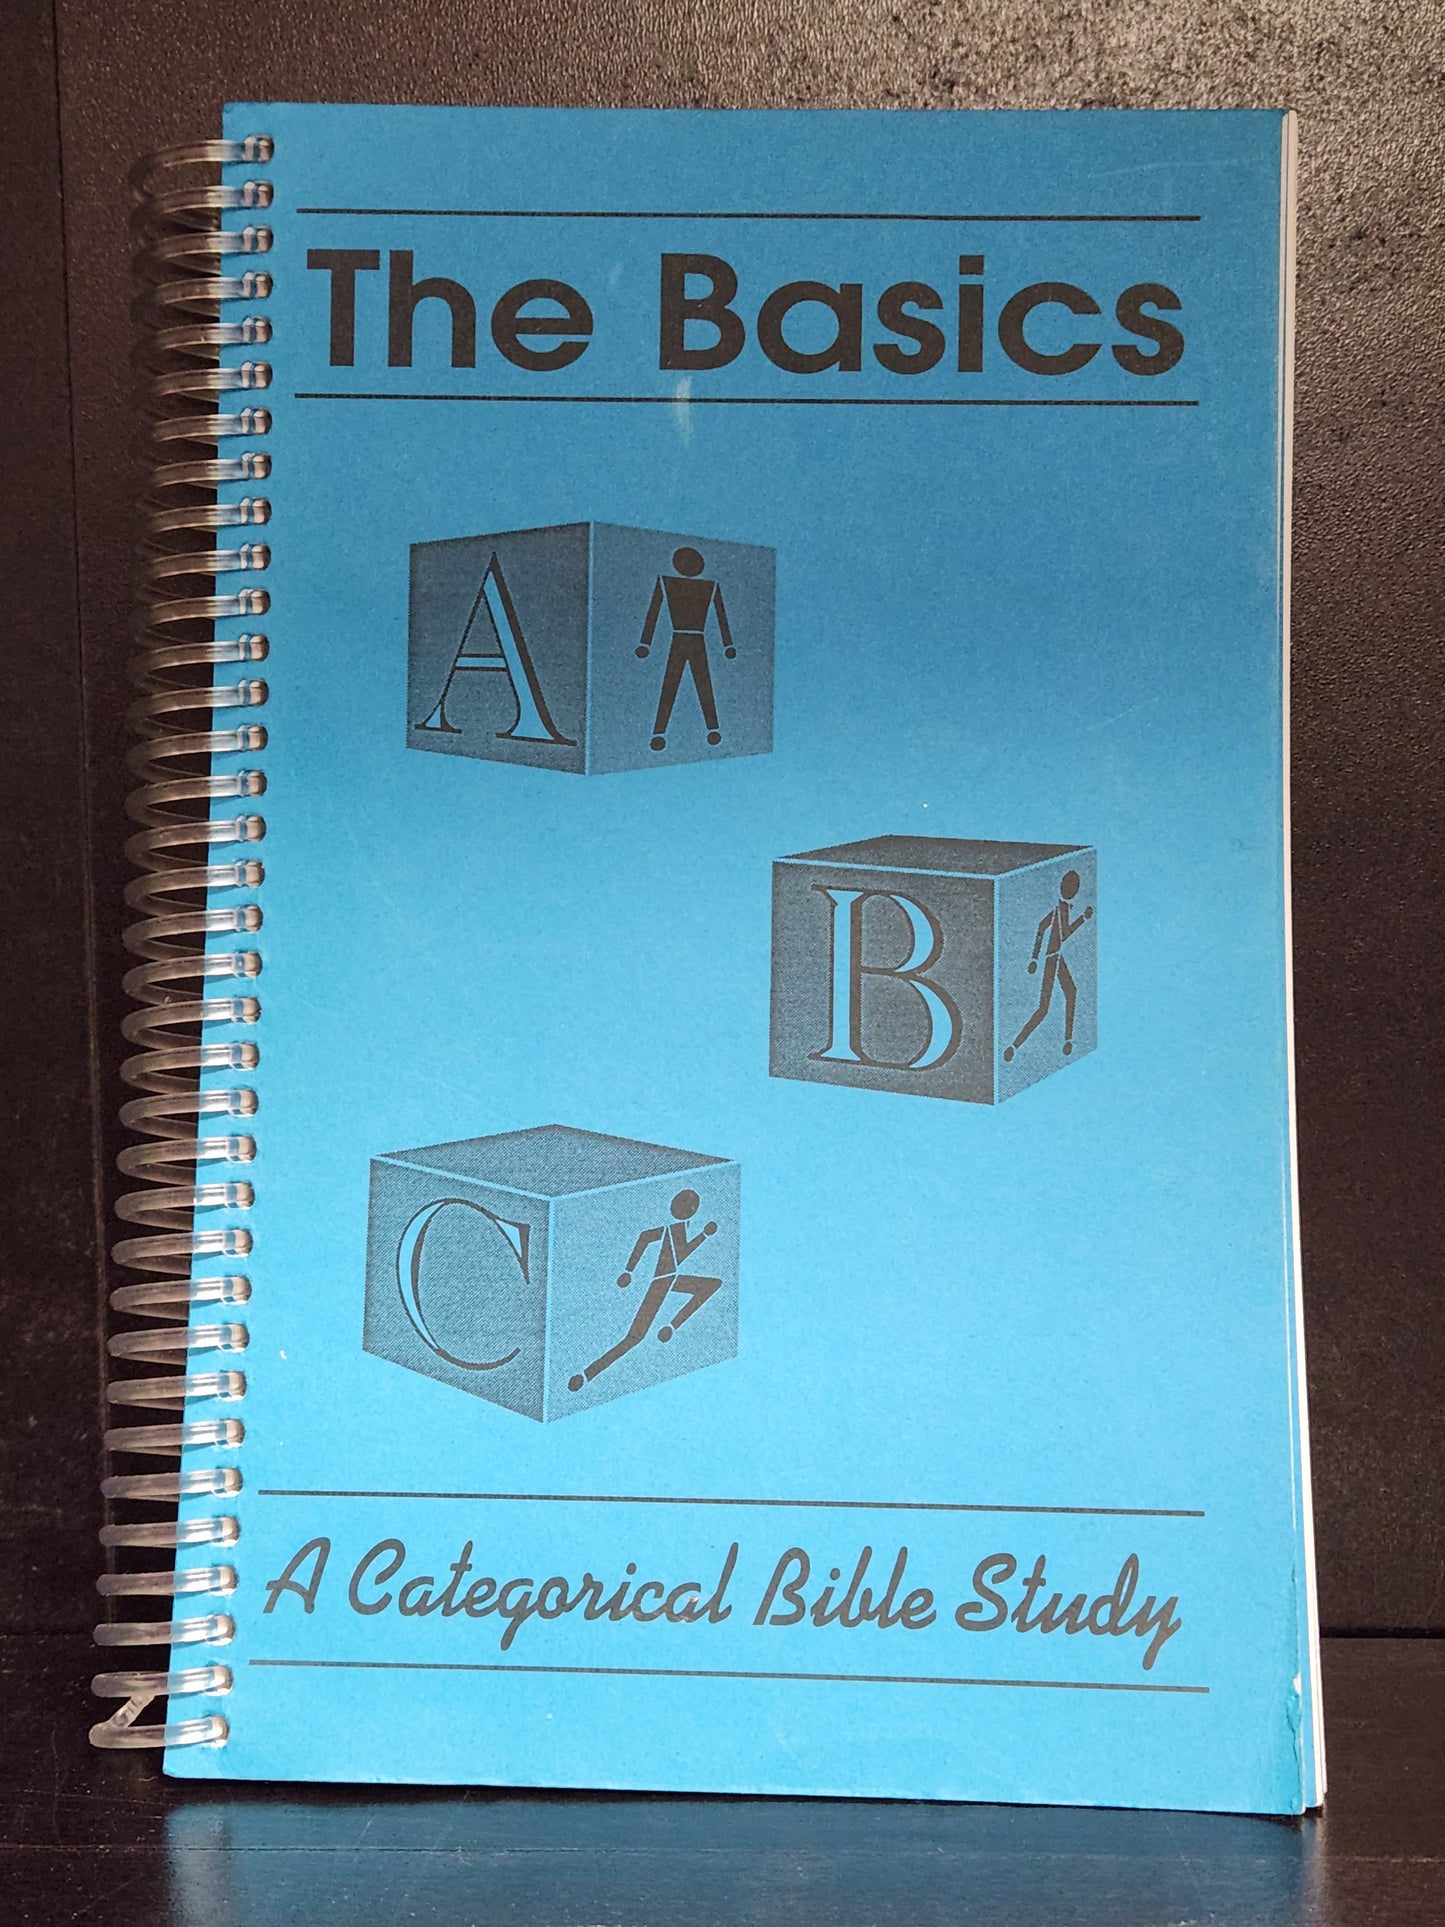 The Basics a Categorical Bible Study, Spiral Bound - Dead Tree Dreams Bookstore